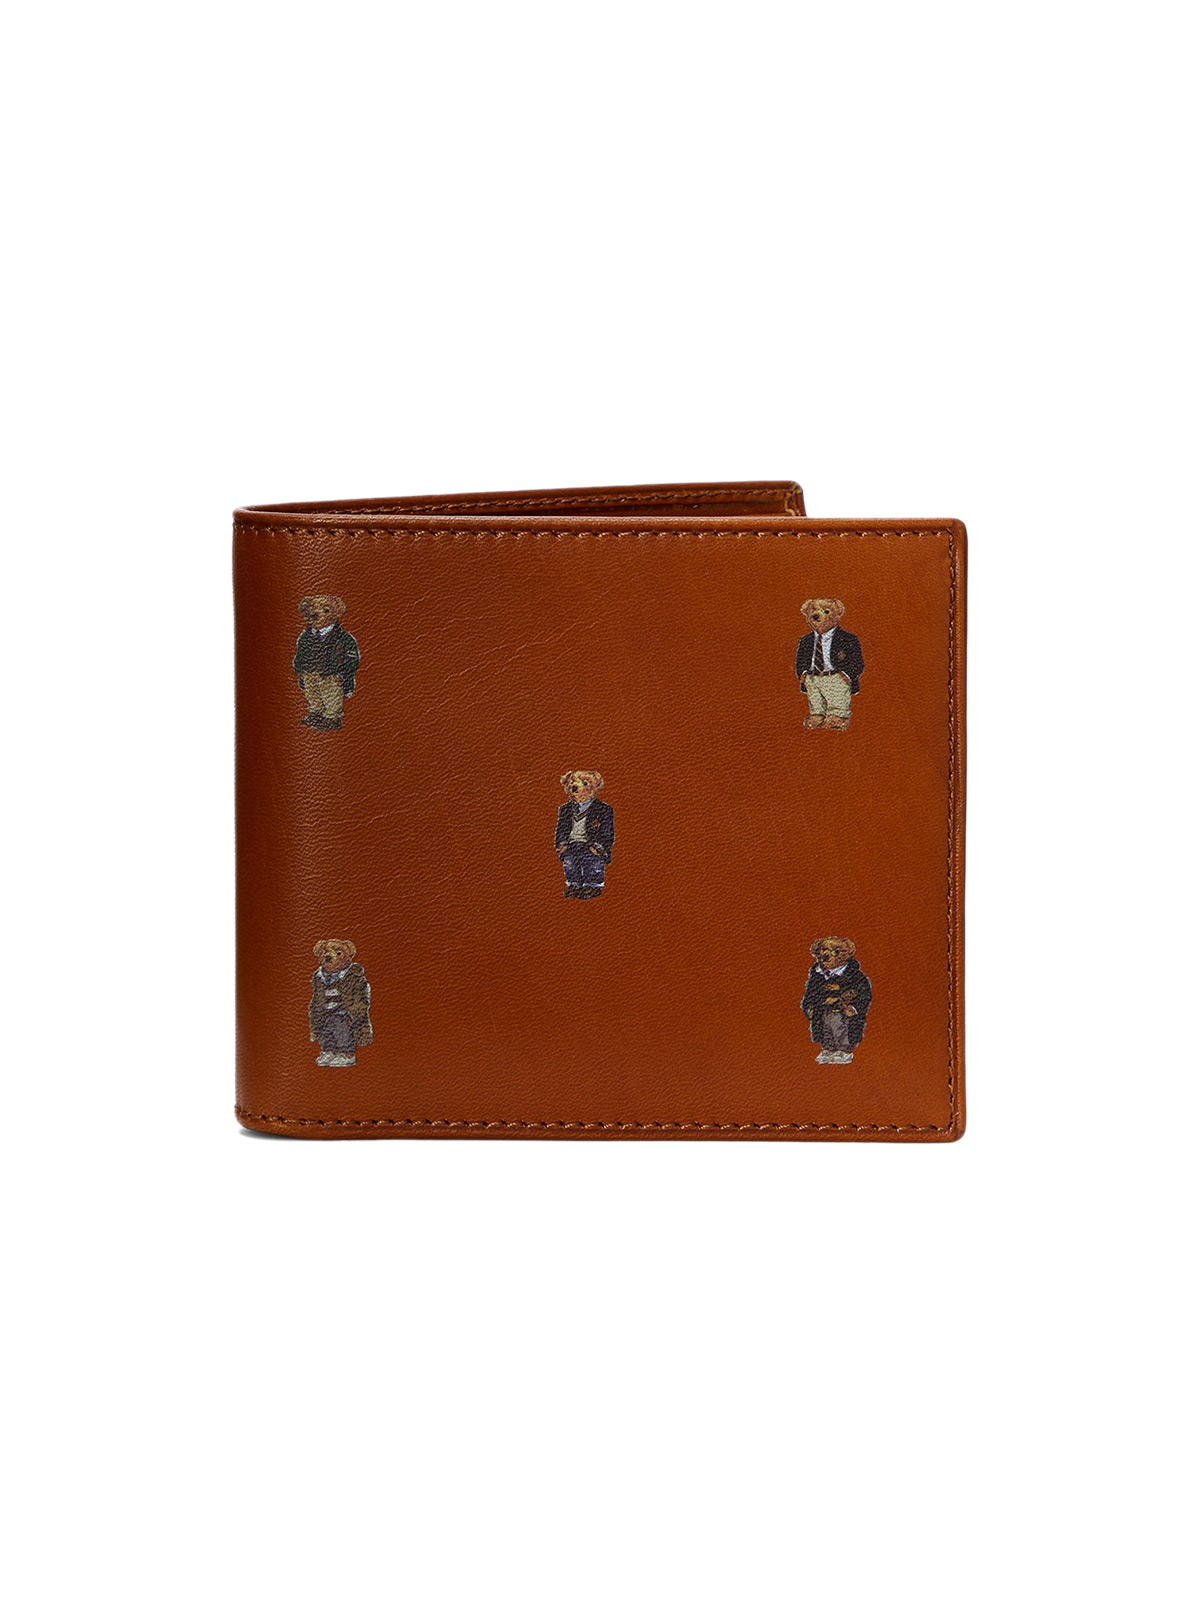 Picture of Polo Ralph Lauren | Wallet Wallet Smooth Leather